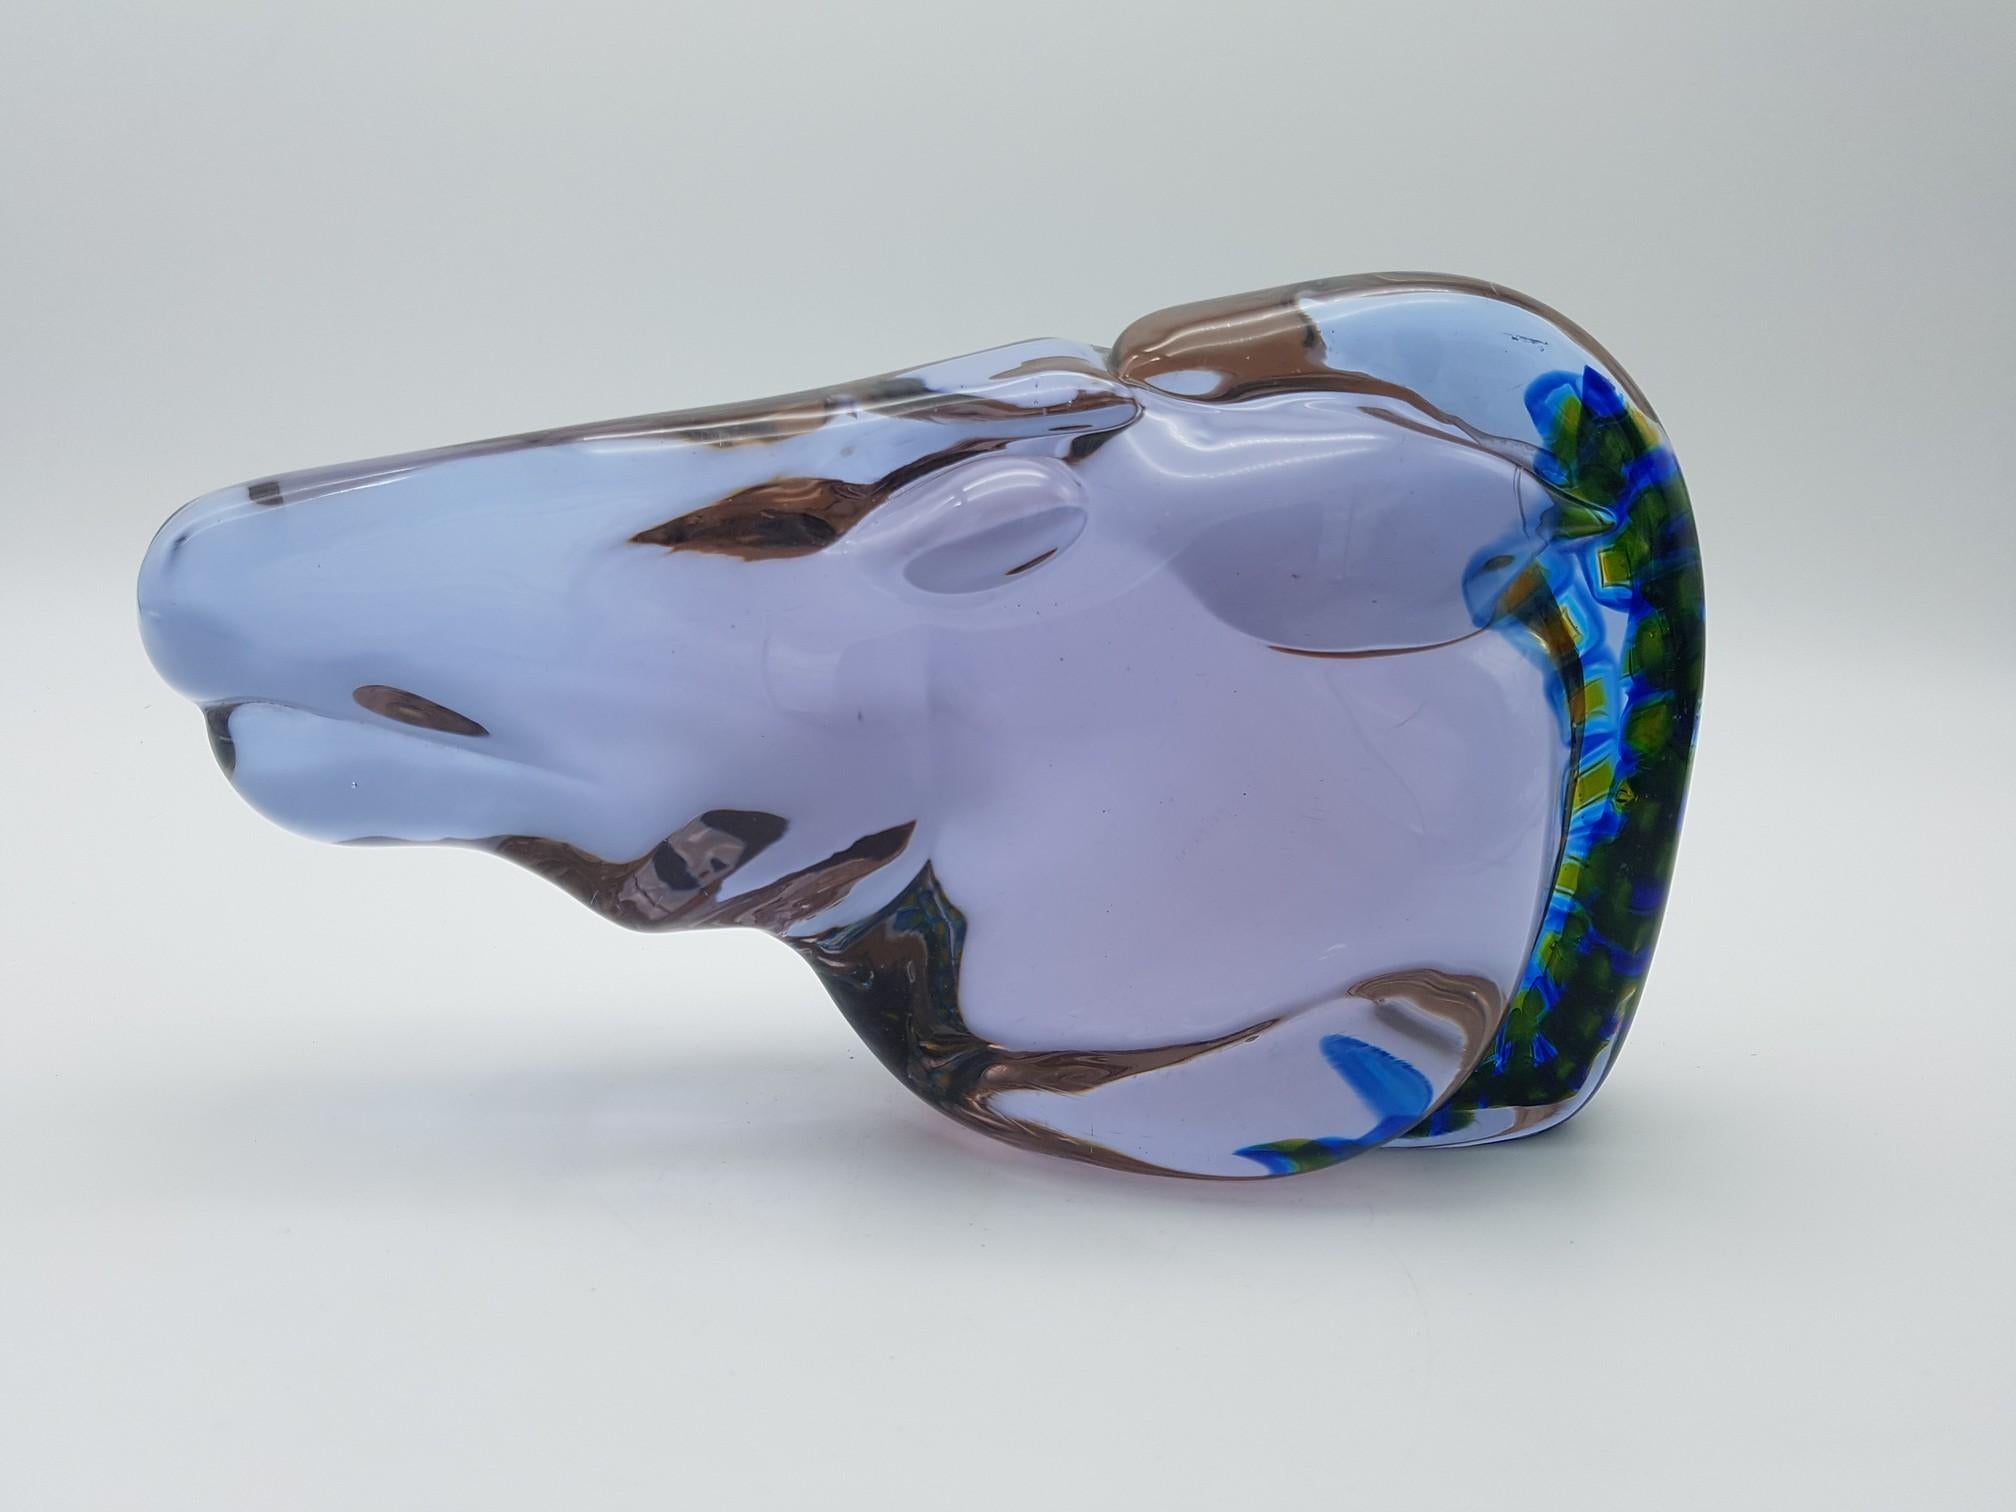 Hand-Crafted Vintage Murano Glass Horse Head by Ermanno Nason at Cenedese, Early 1970s For Sale